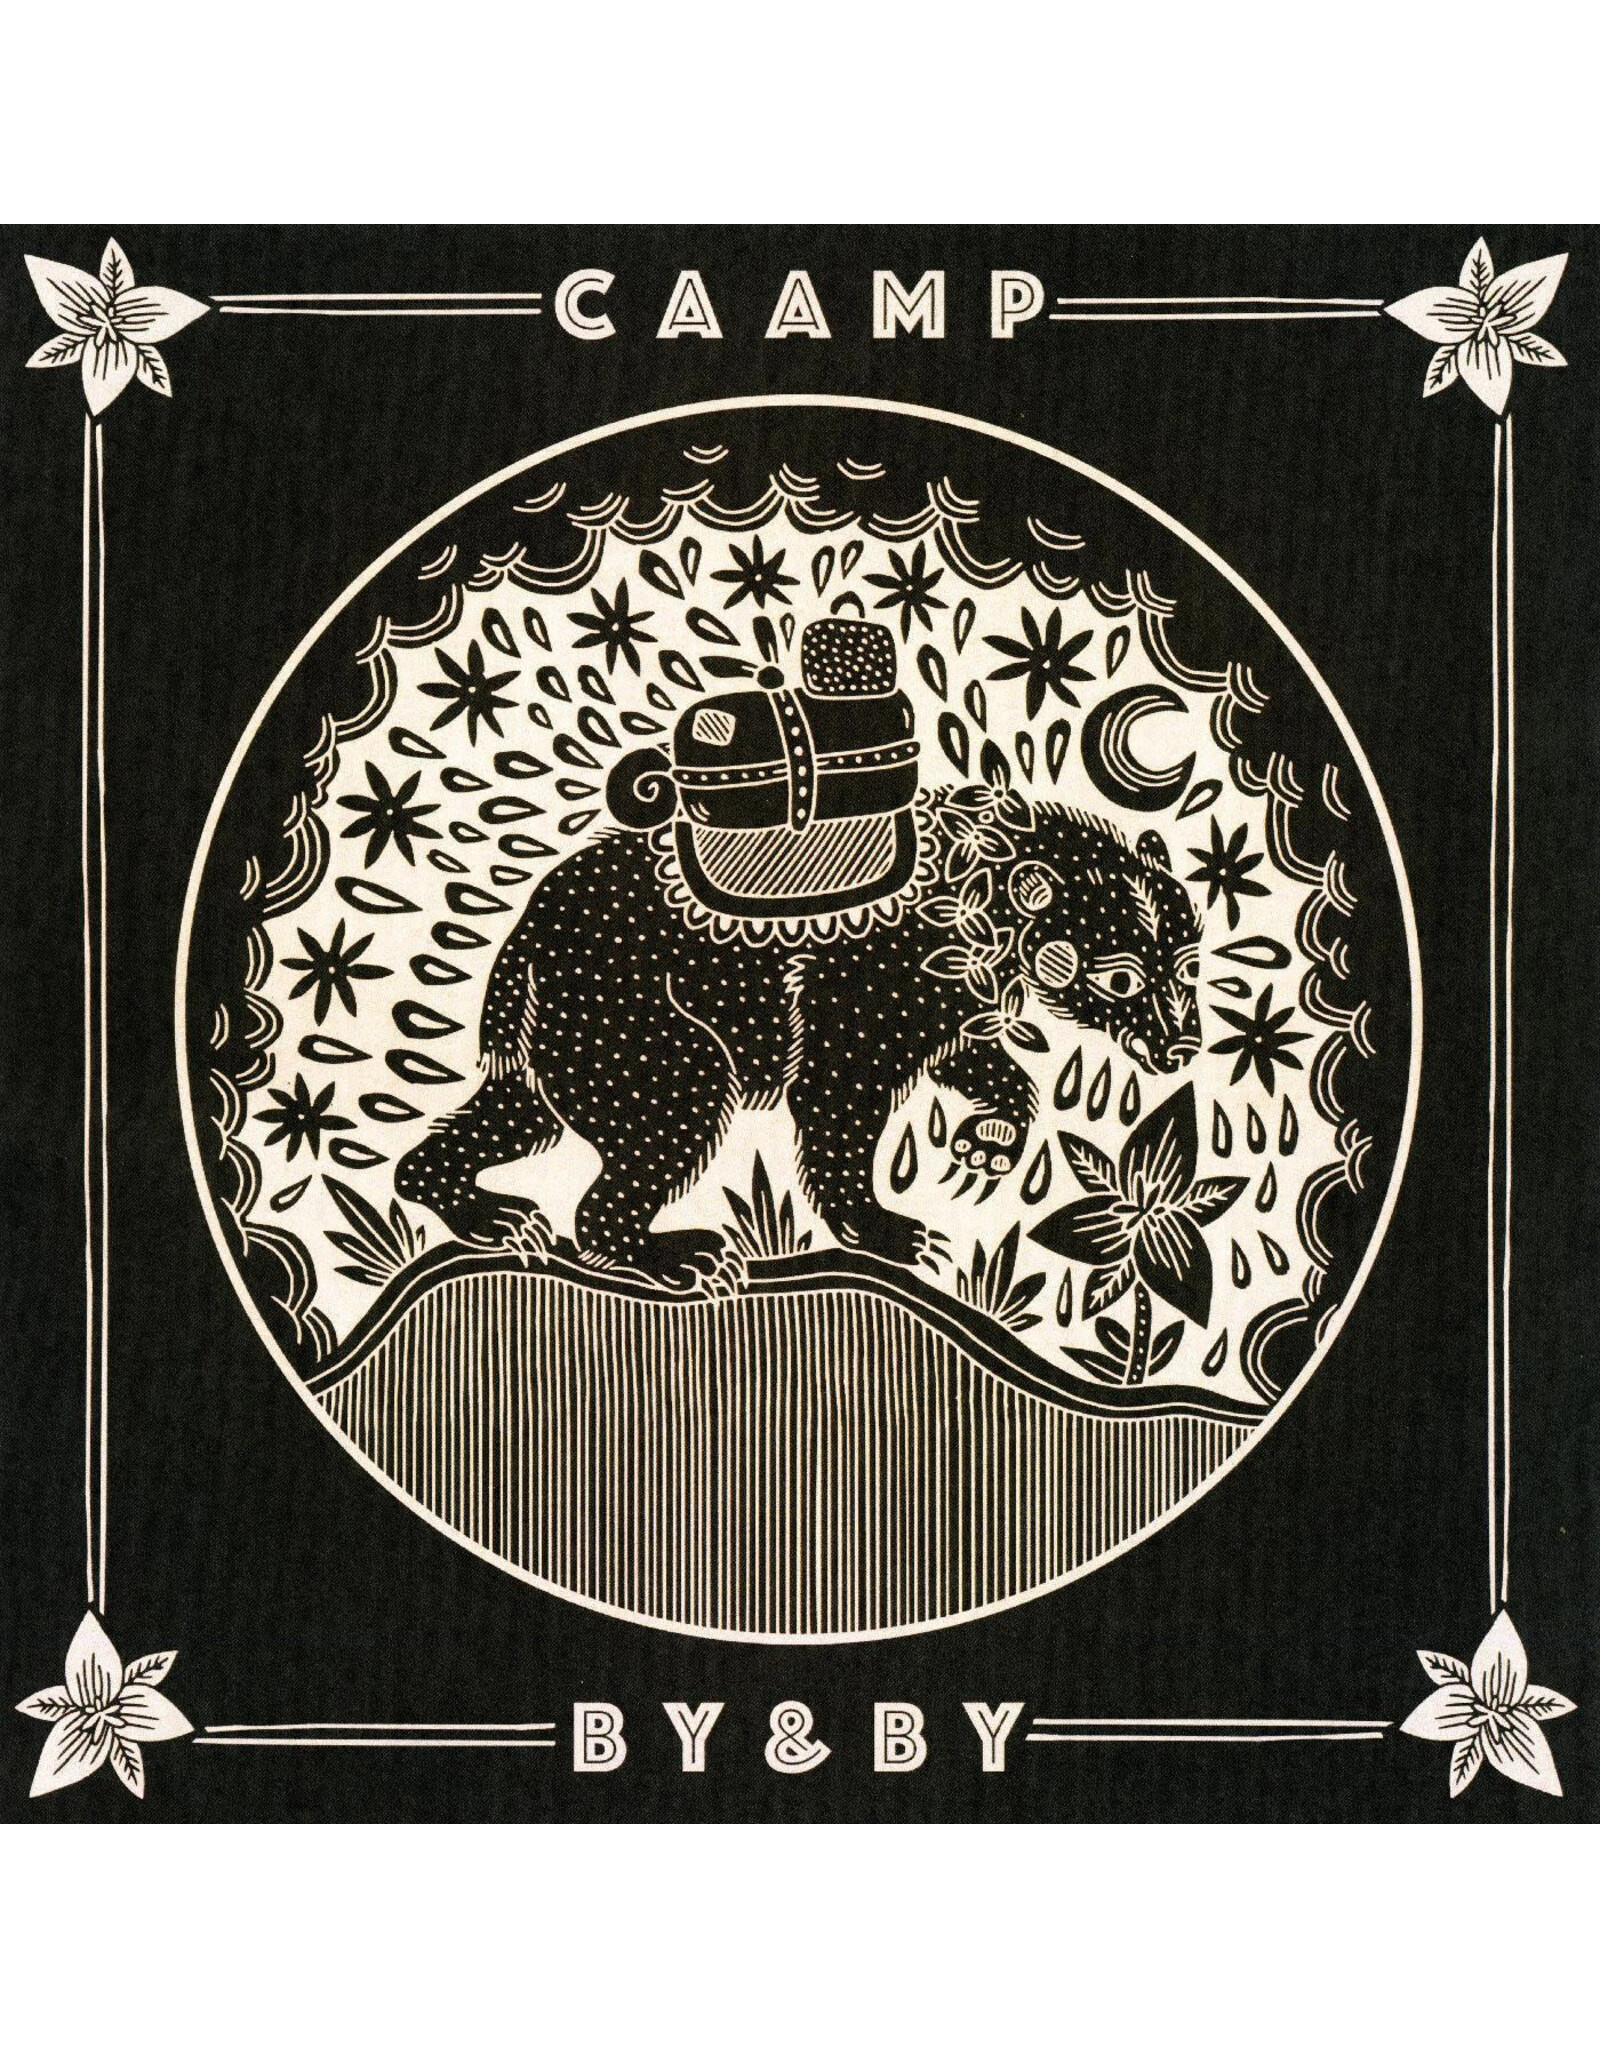 Caamp - By & By (Black & White Vinyl)